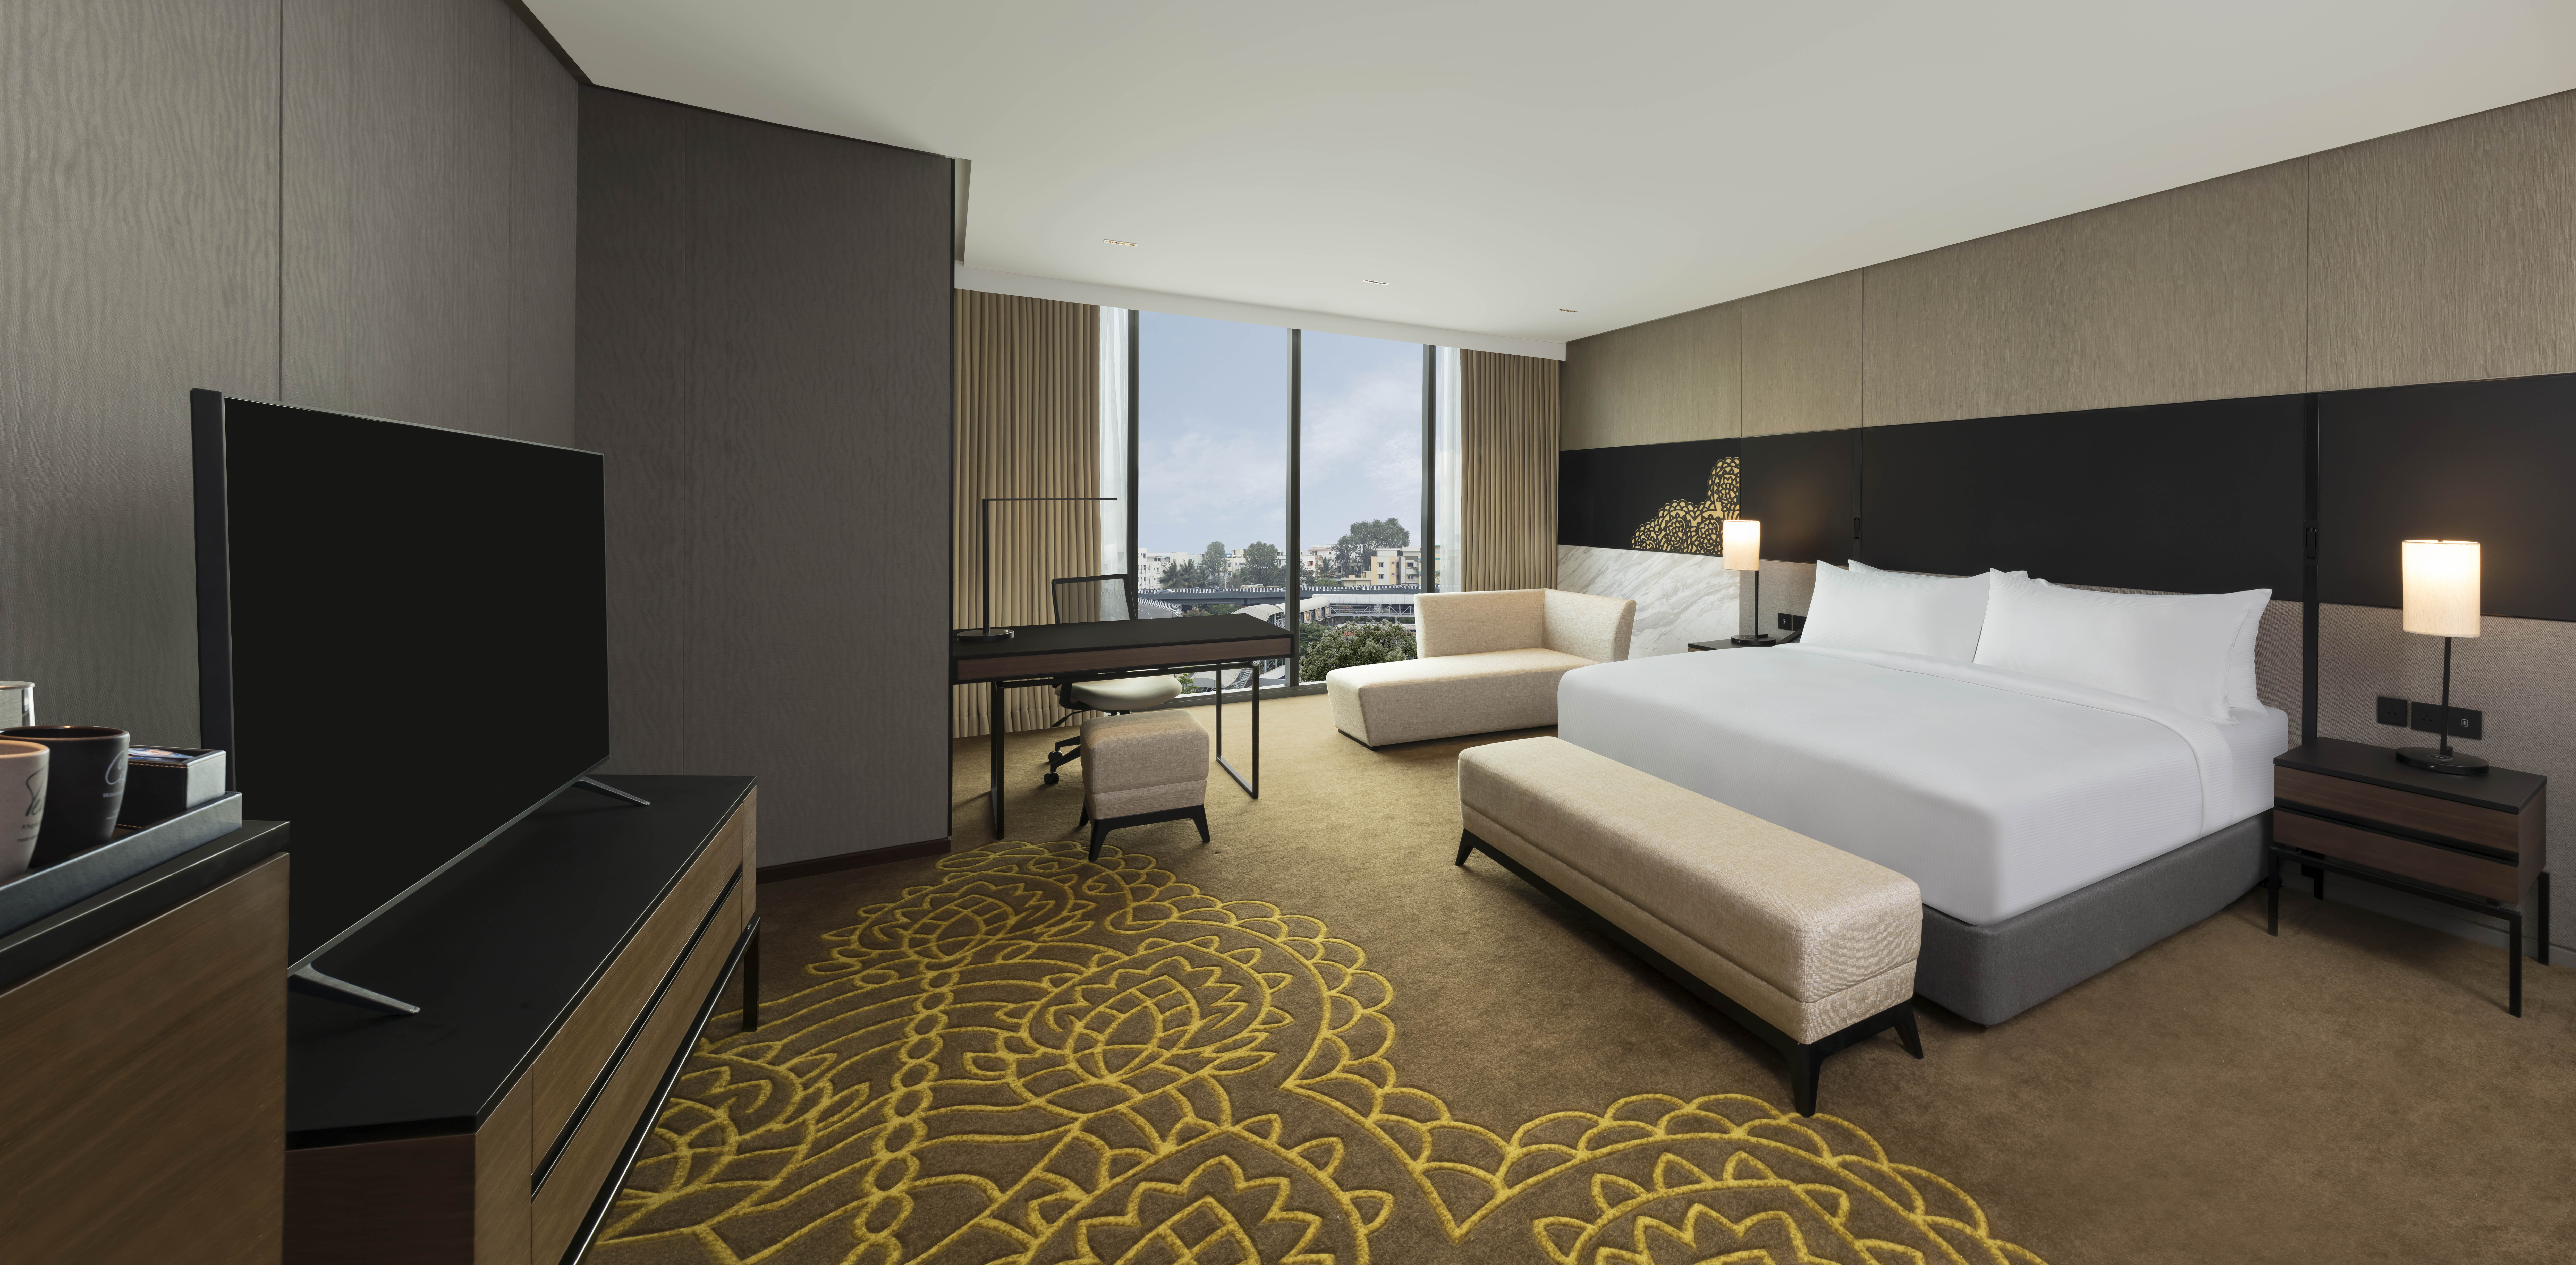 Hilton Hotels & Resorts, Hilton Garden Inn and State-of-the-Art Hilton Convention Centre Debut at Largest Hospitality Complex in Bengaluru, India